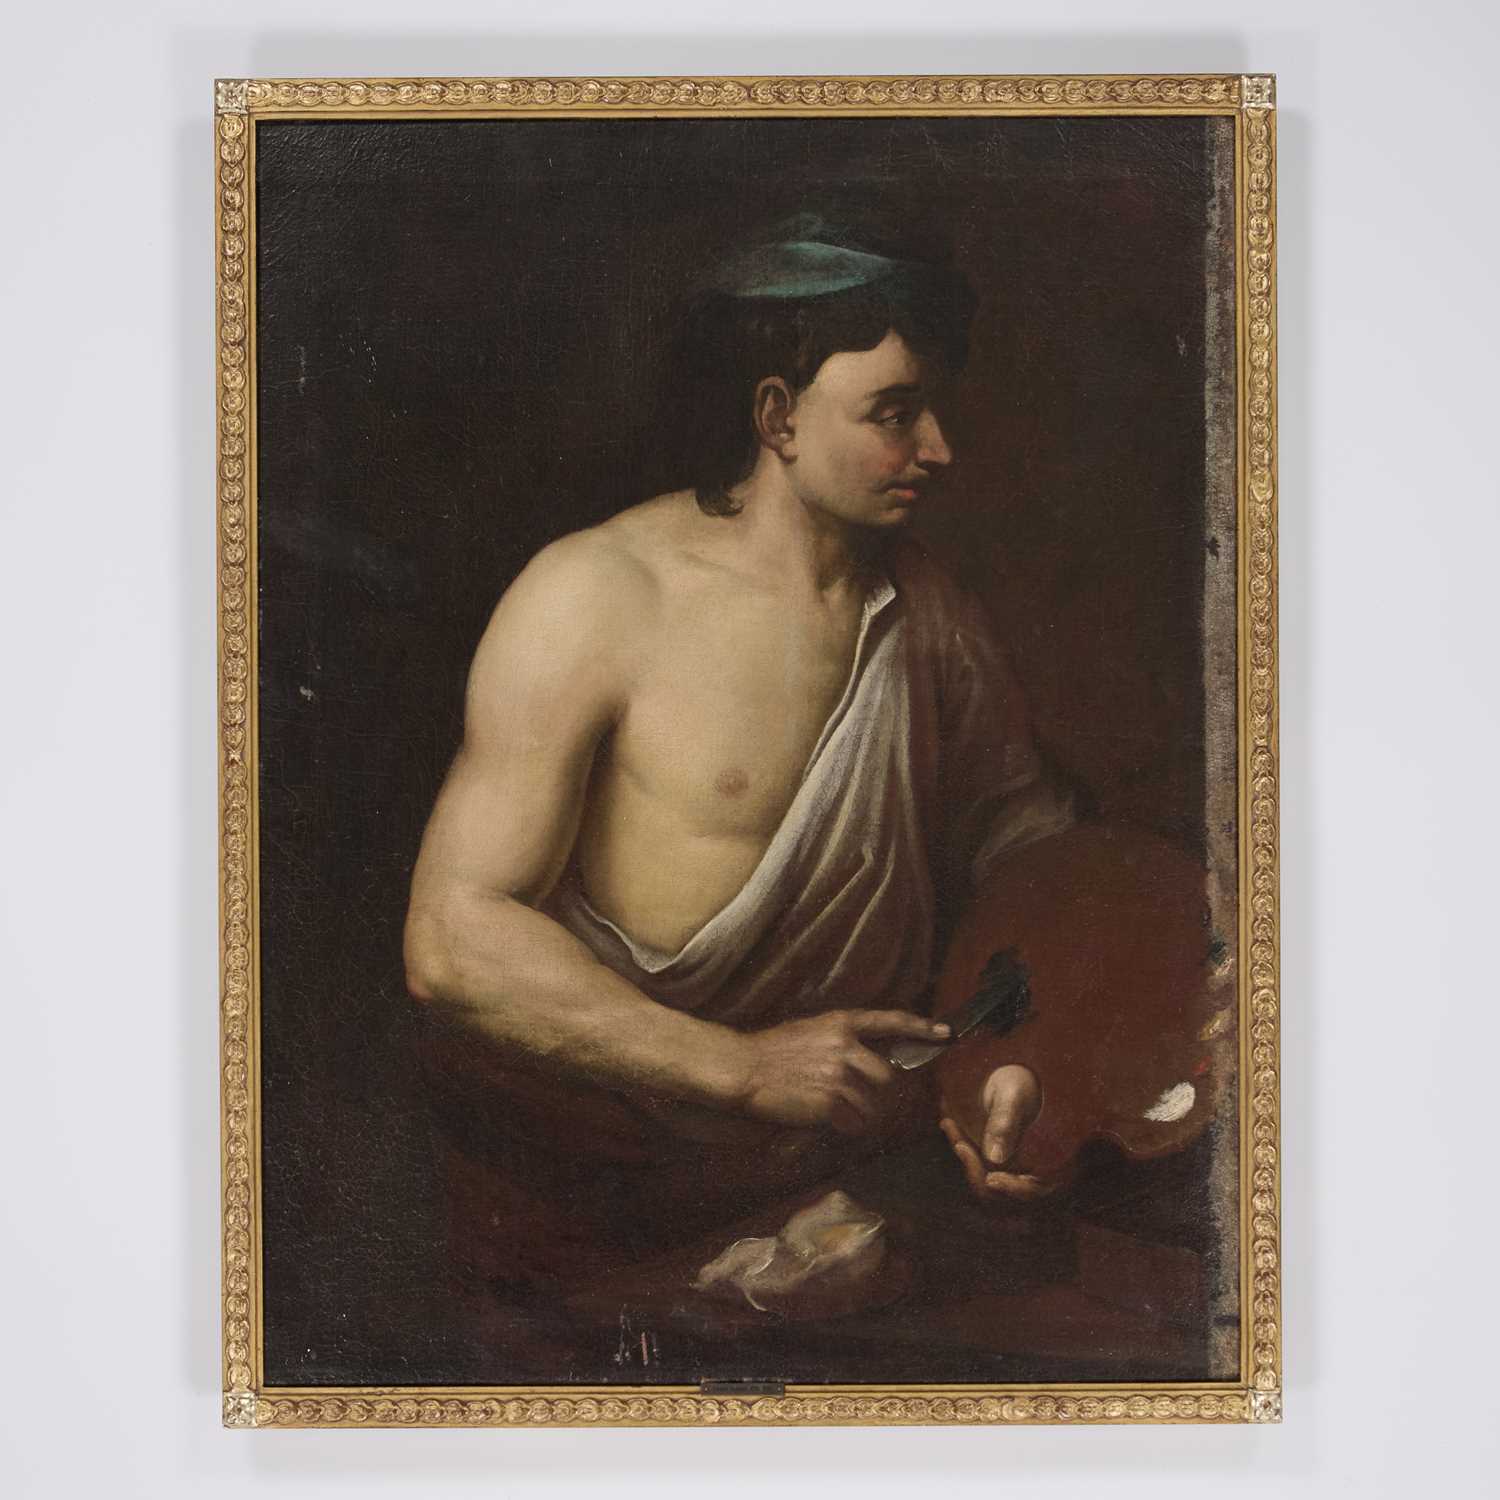 ATTRIBUTED TO JOHANN CONRAD SEEKATZ (GERMAN 1719-1768) PORTRAIT OF AN ARTIST WITH HIS PALETTE - Image 2 of 3